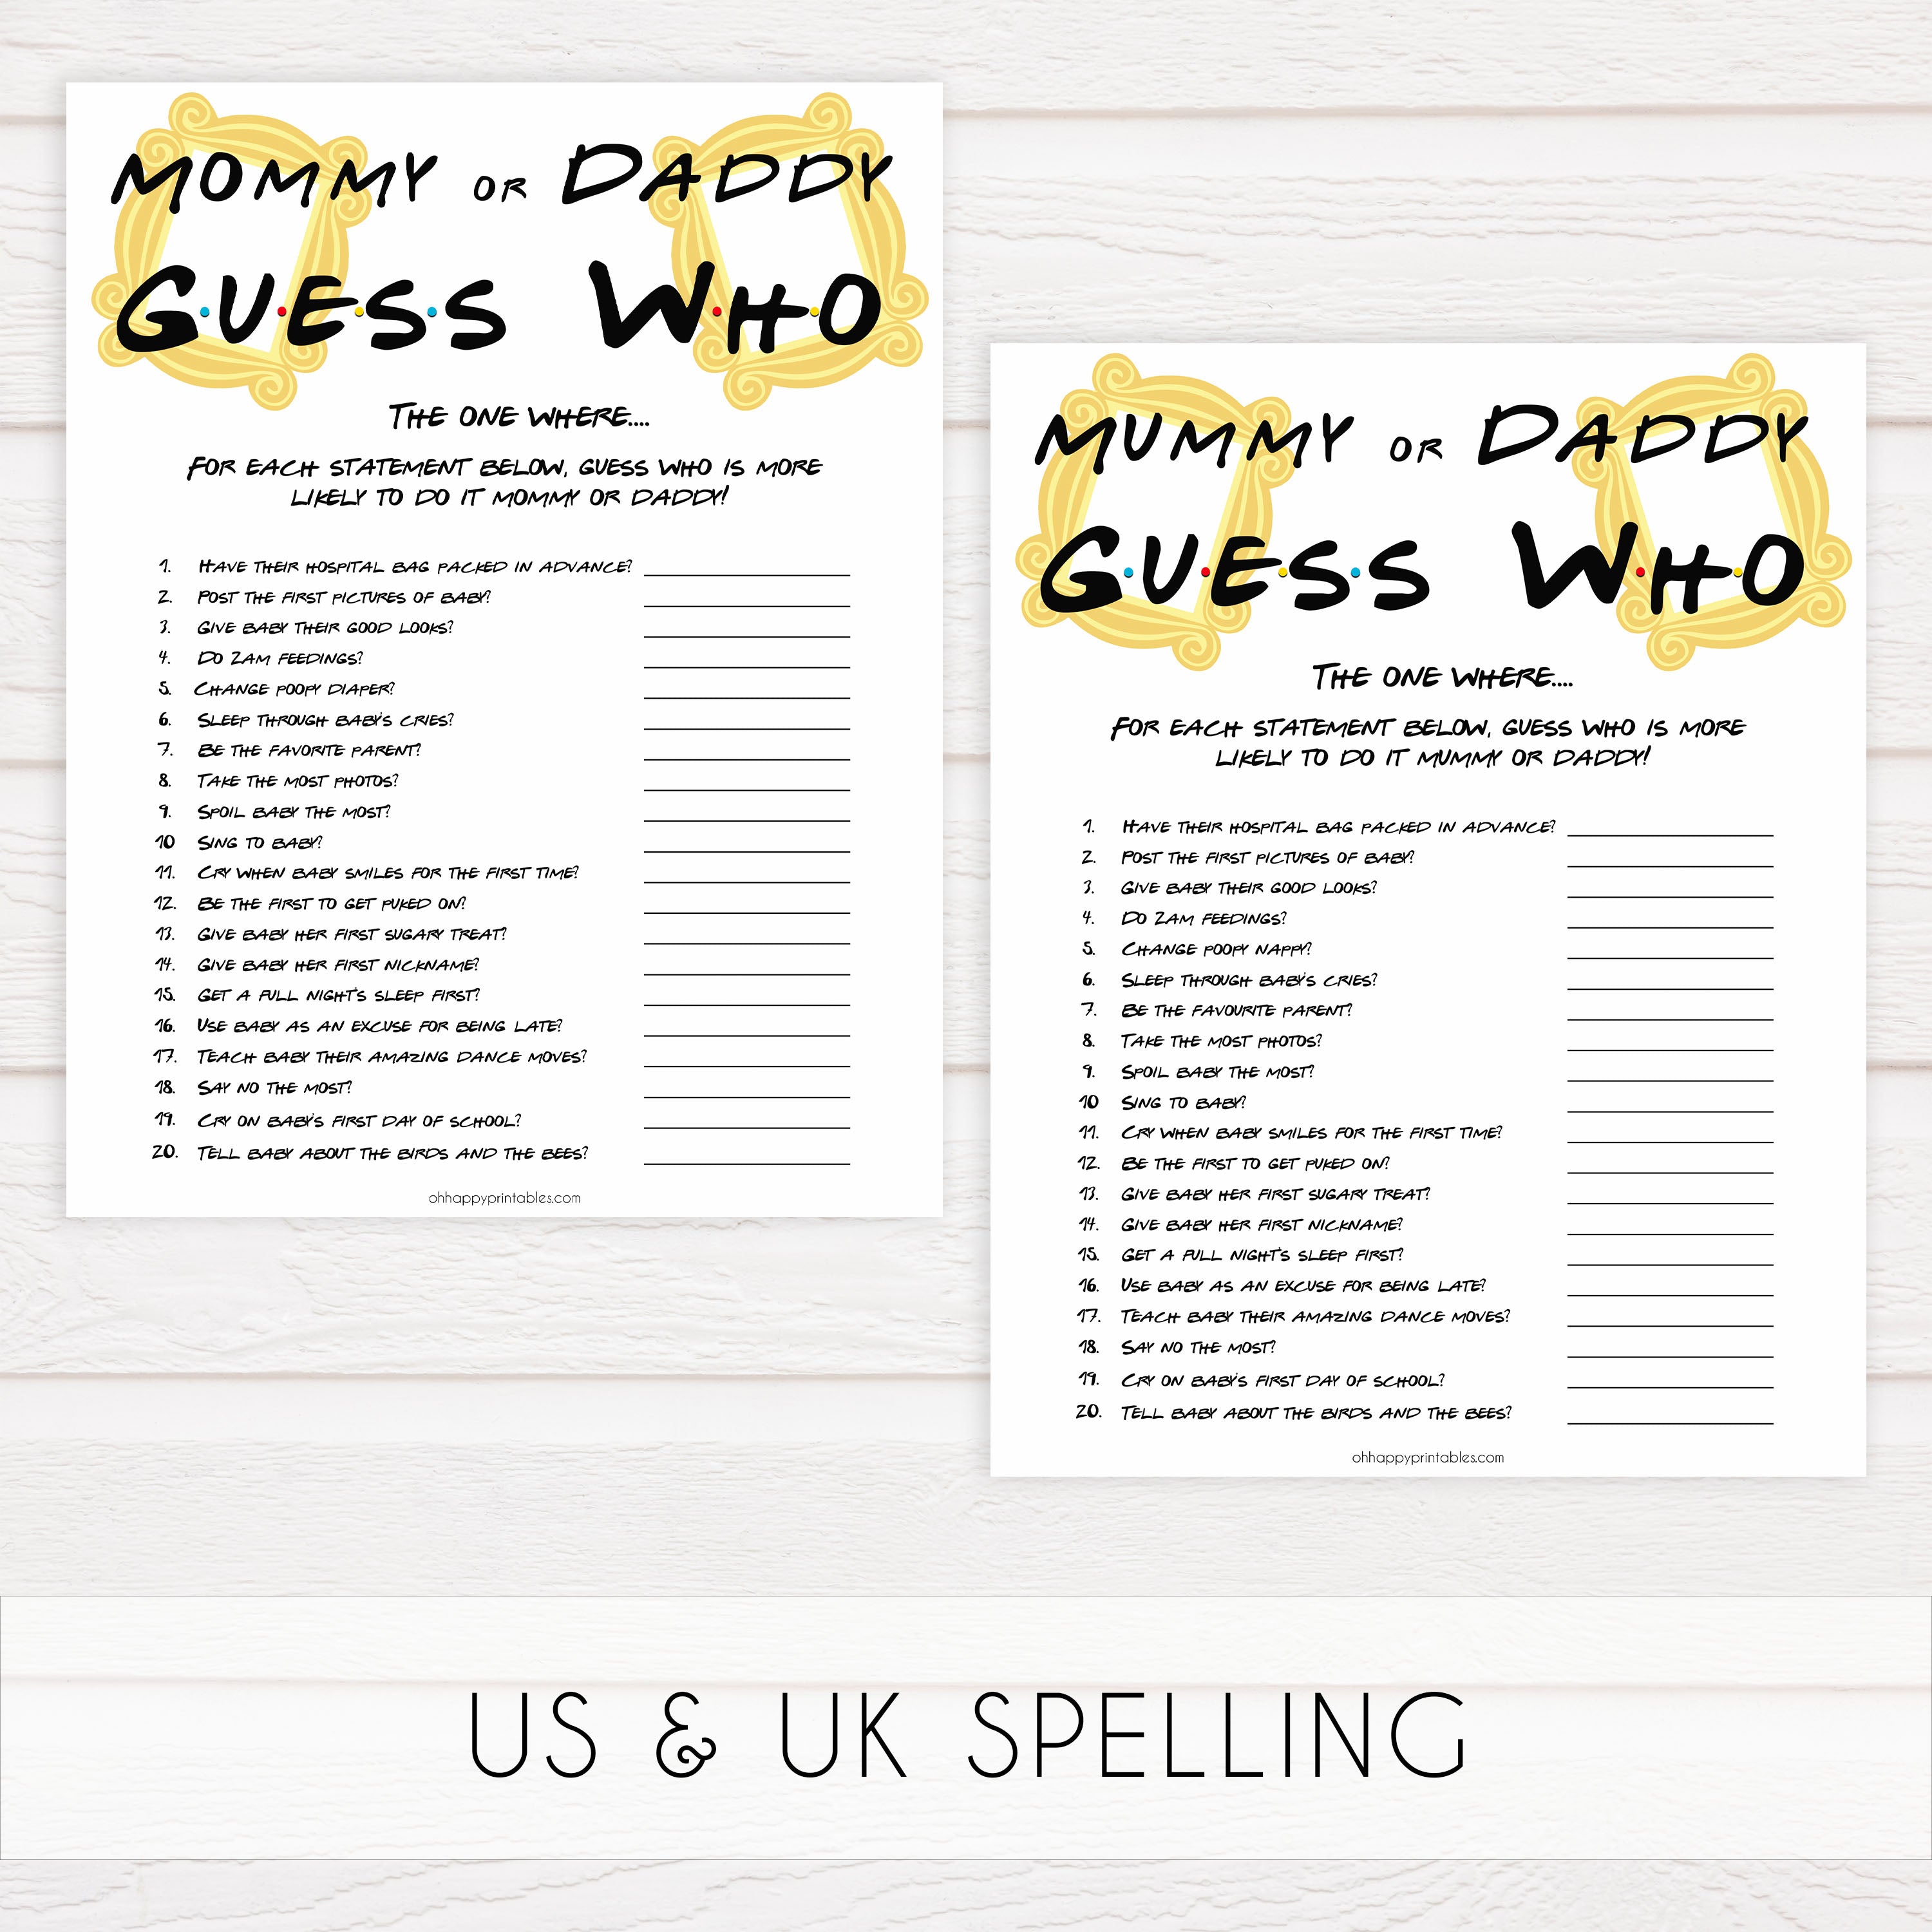 guess who baby game, Printable baby shower games, friends fun baby games, baby shower games, fun baby shower ideas, top baby shower ideas, friends baby shower, friends baby shower ideas